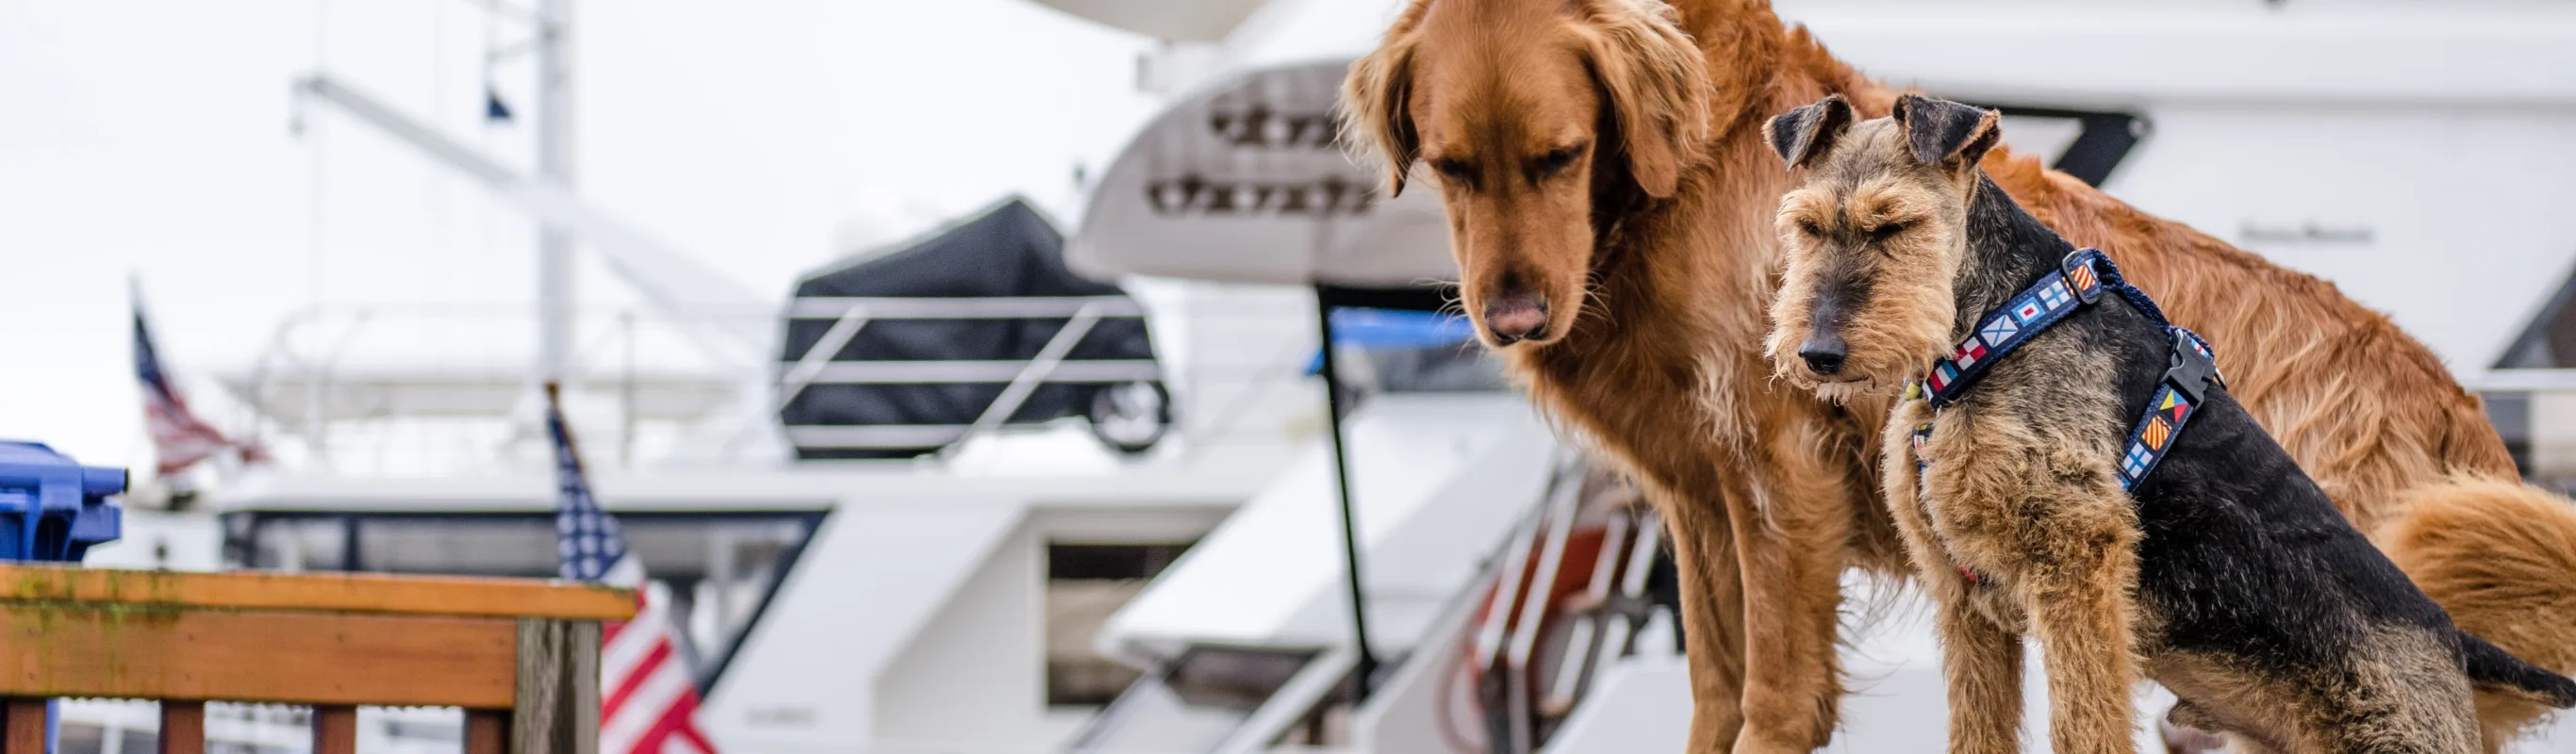 two dogs on boat in dock area